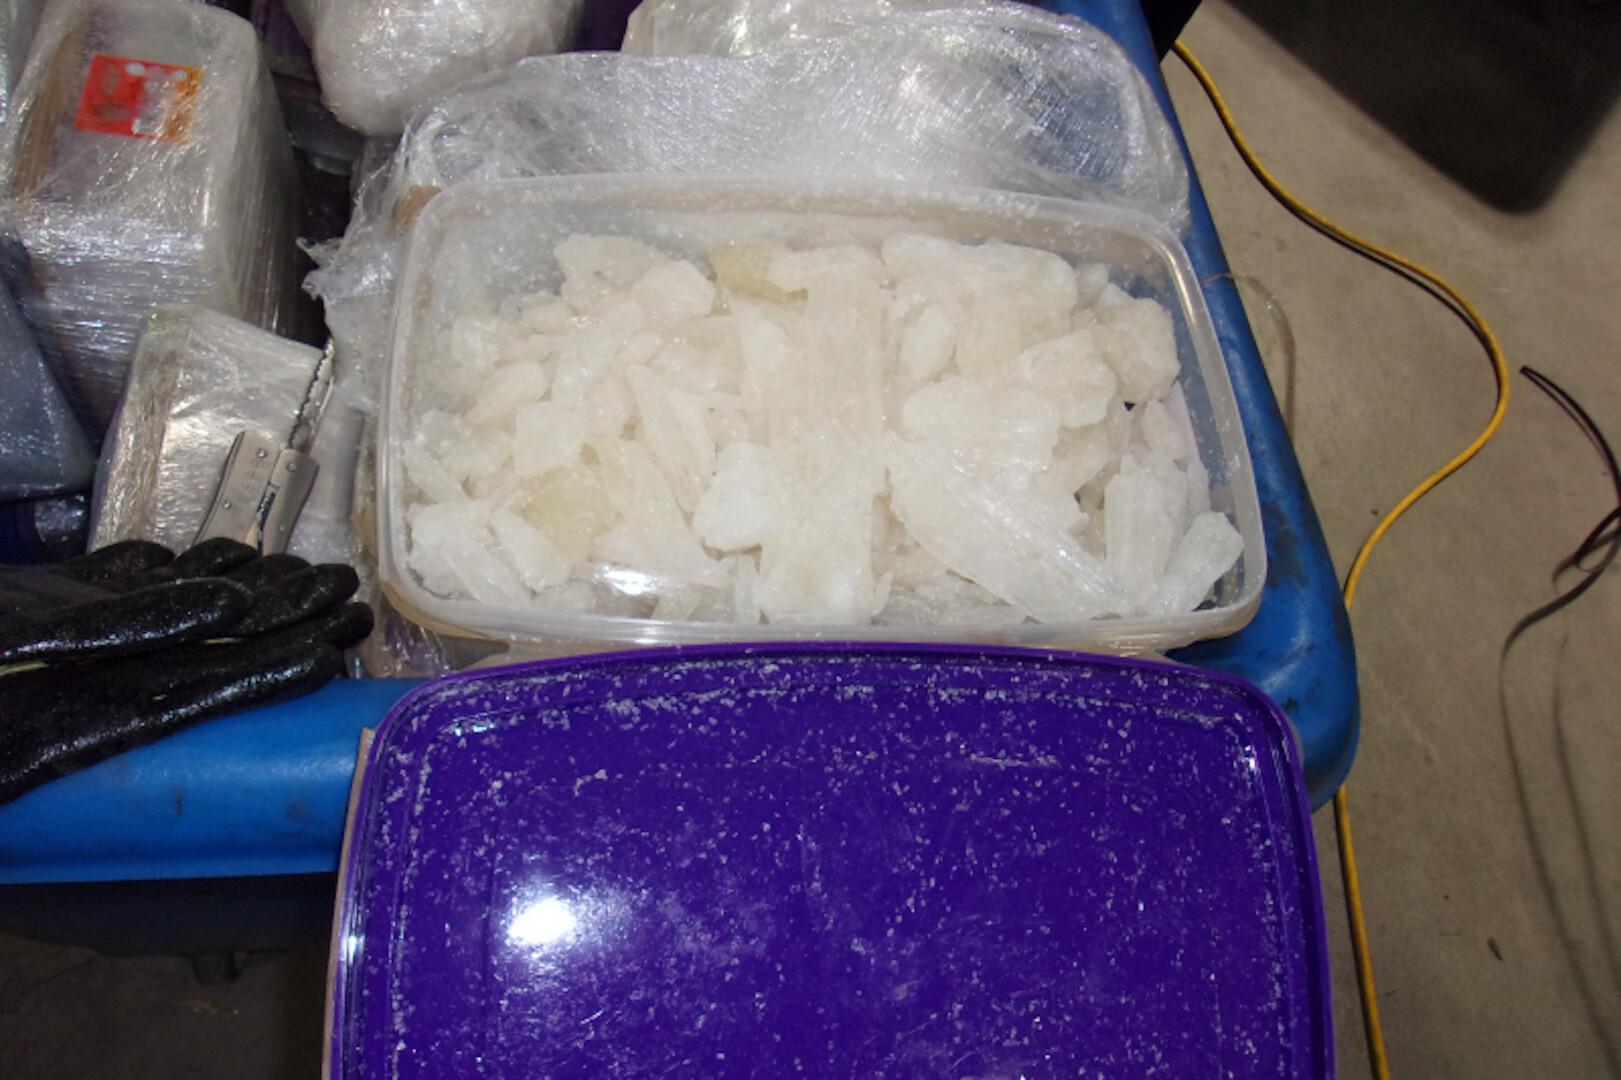 22 Charged in Drug Ring Bust That Netted 12,900 Pounds of Meth